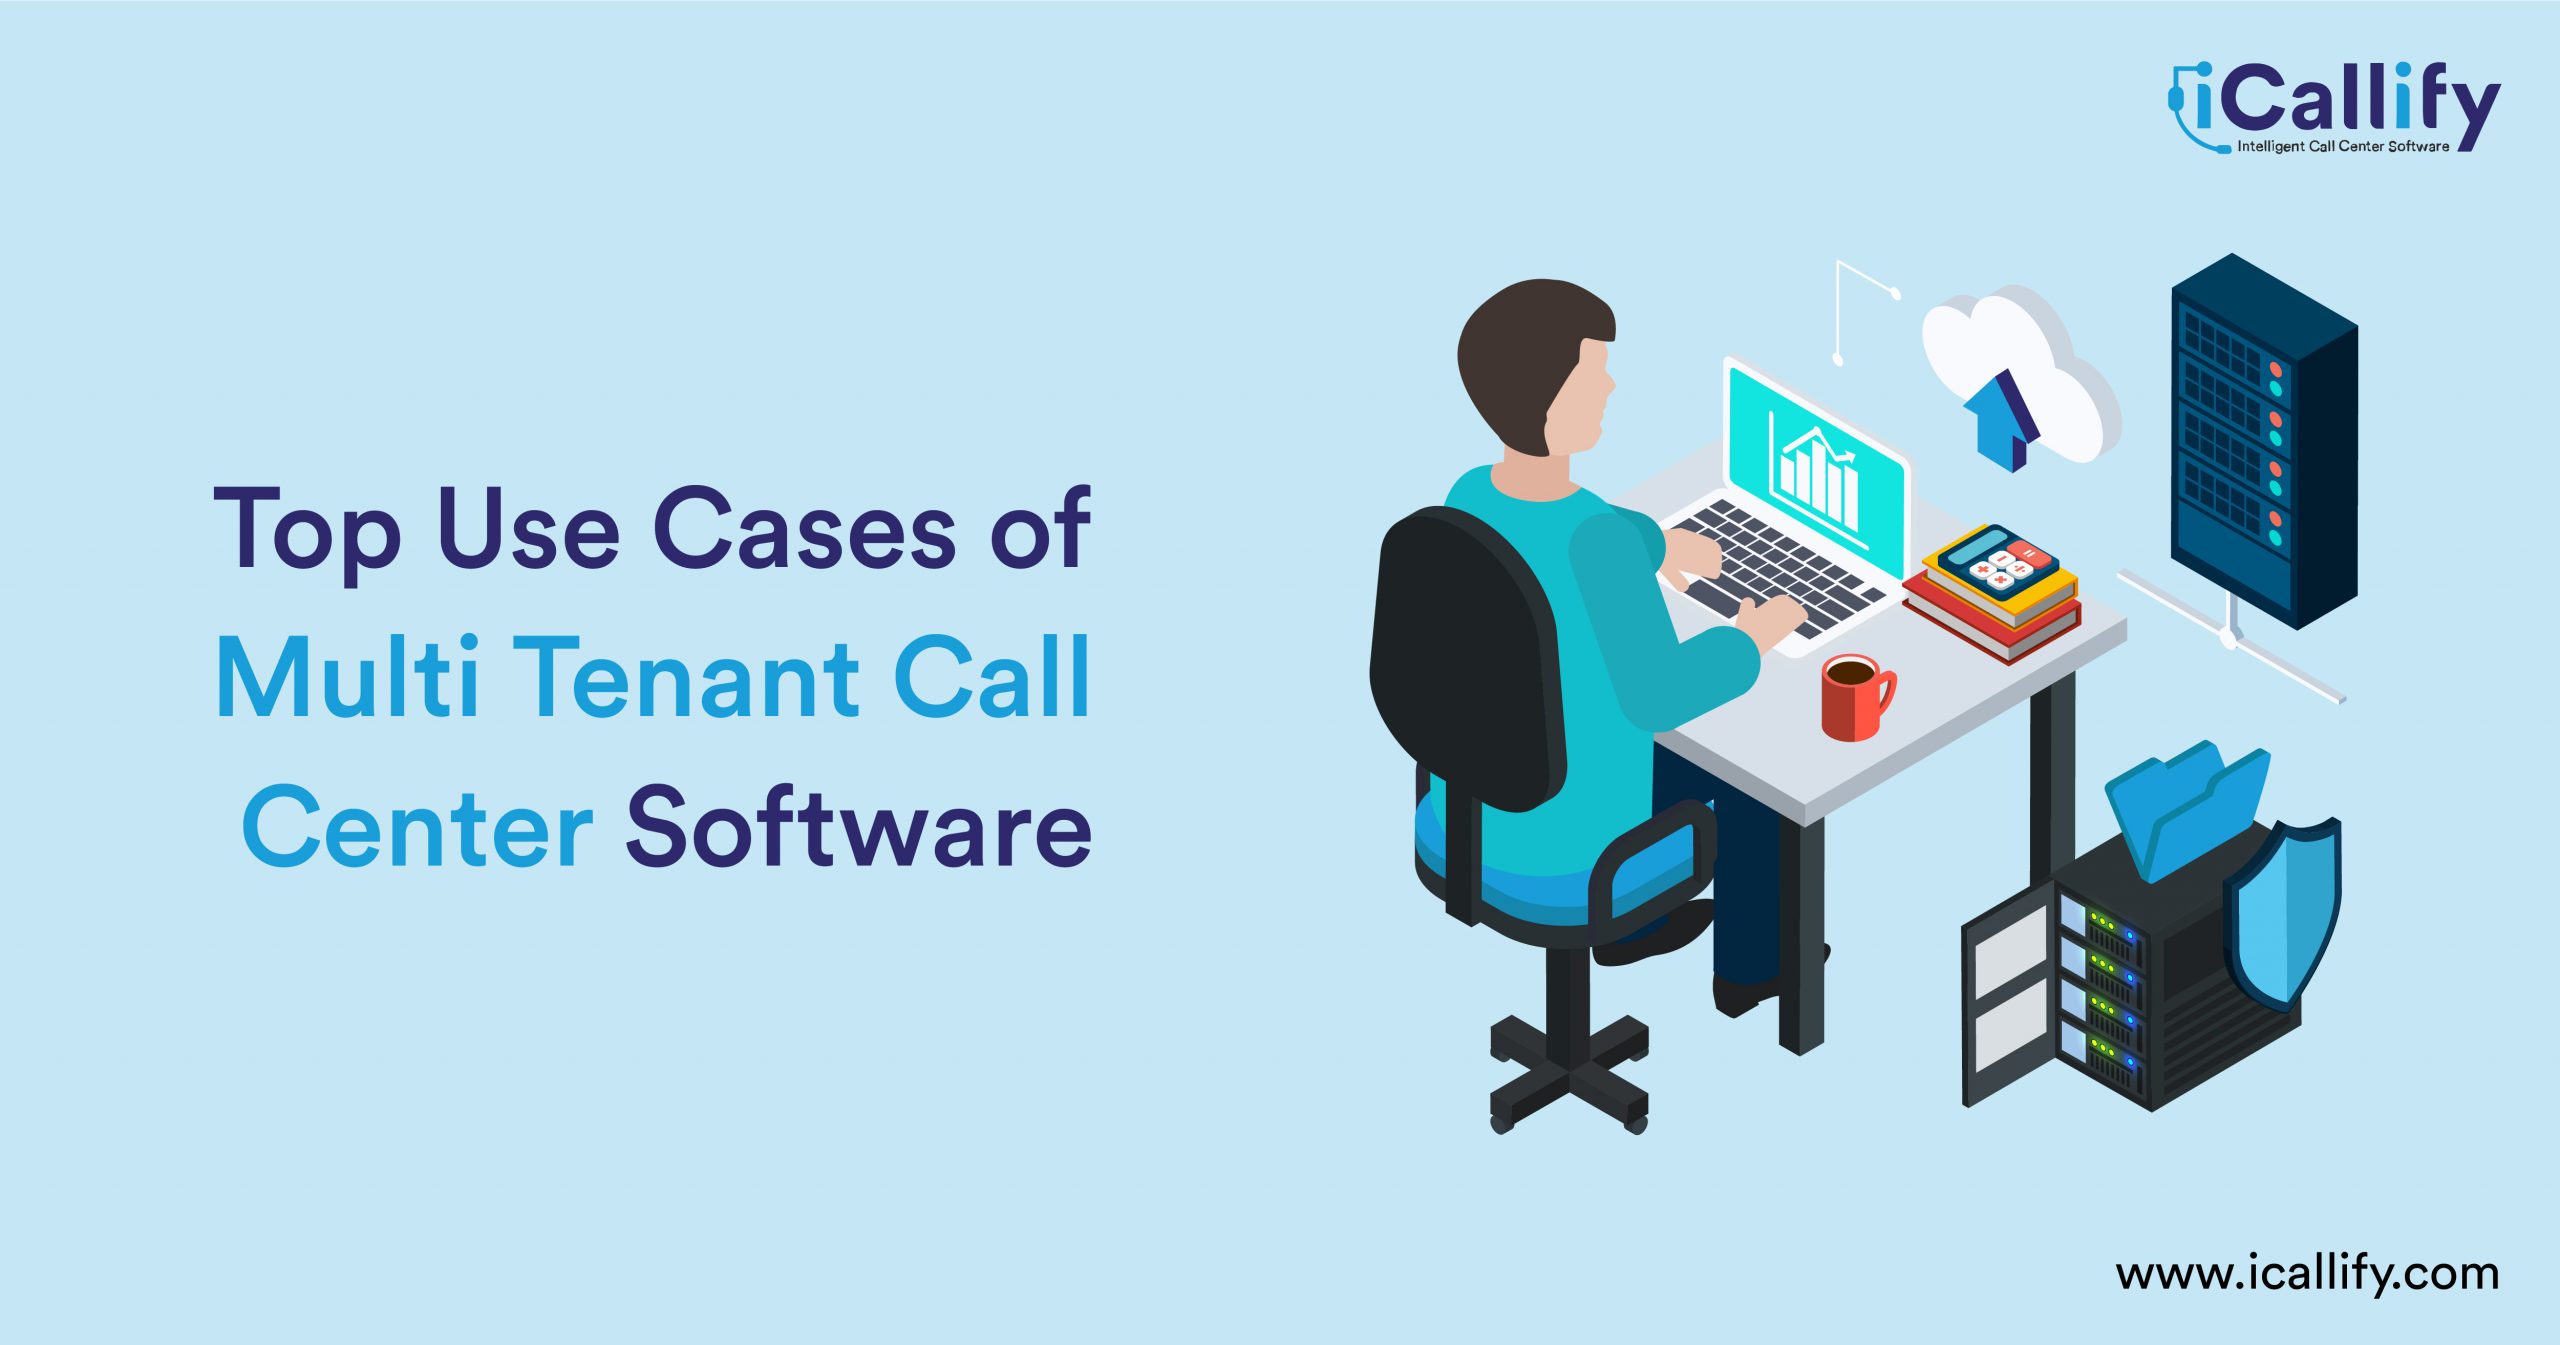 Top Use Cases of Multi Tenant Call Center Software